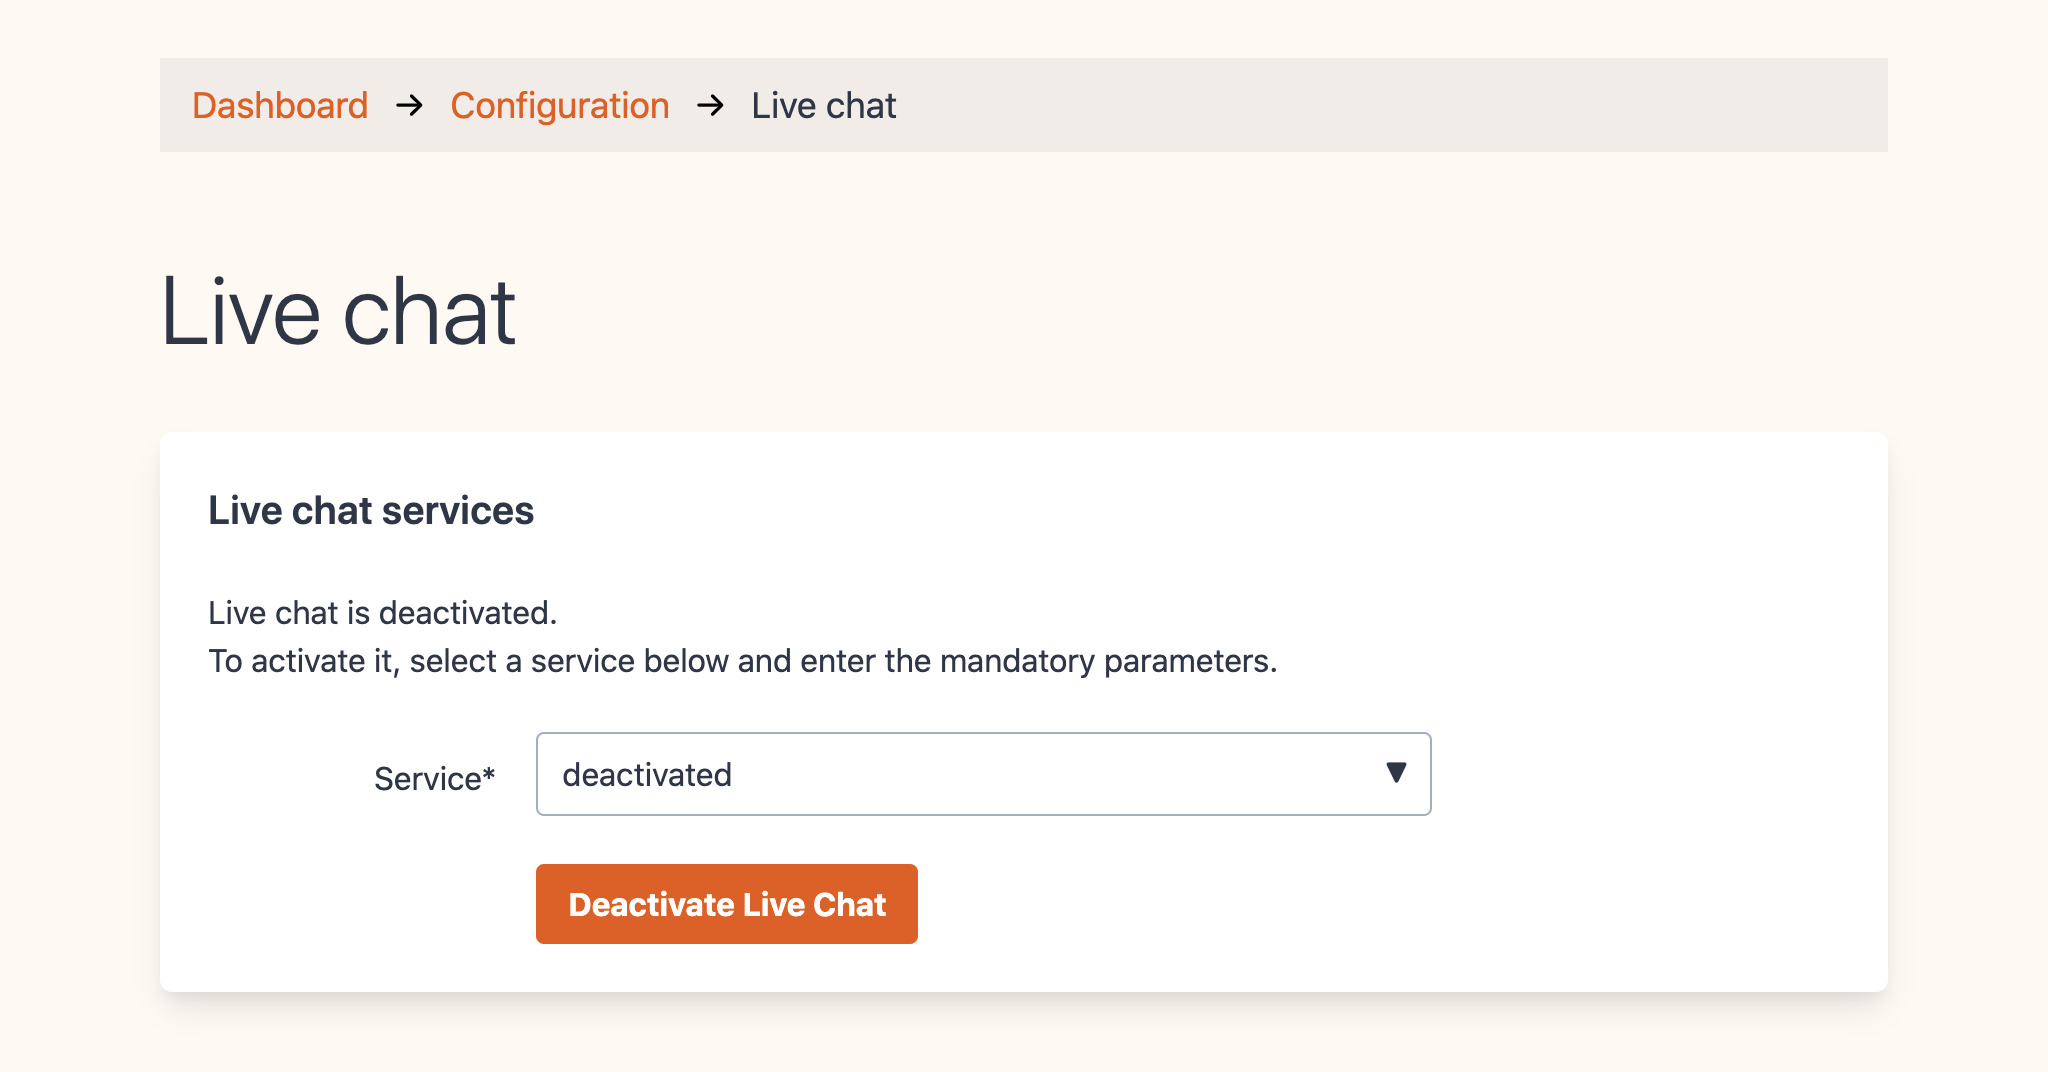 Live chat deactivated